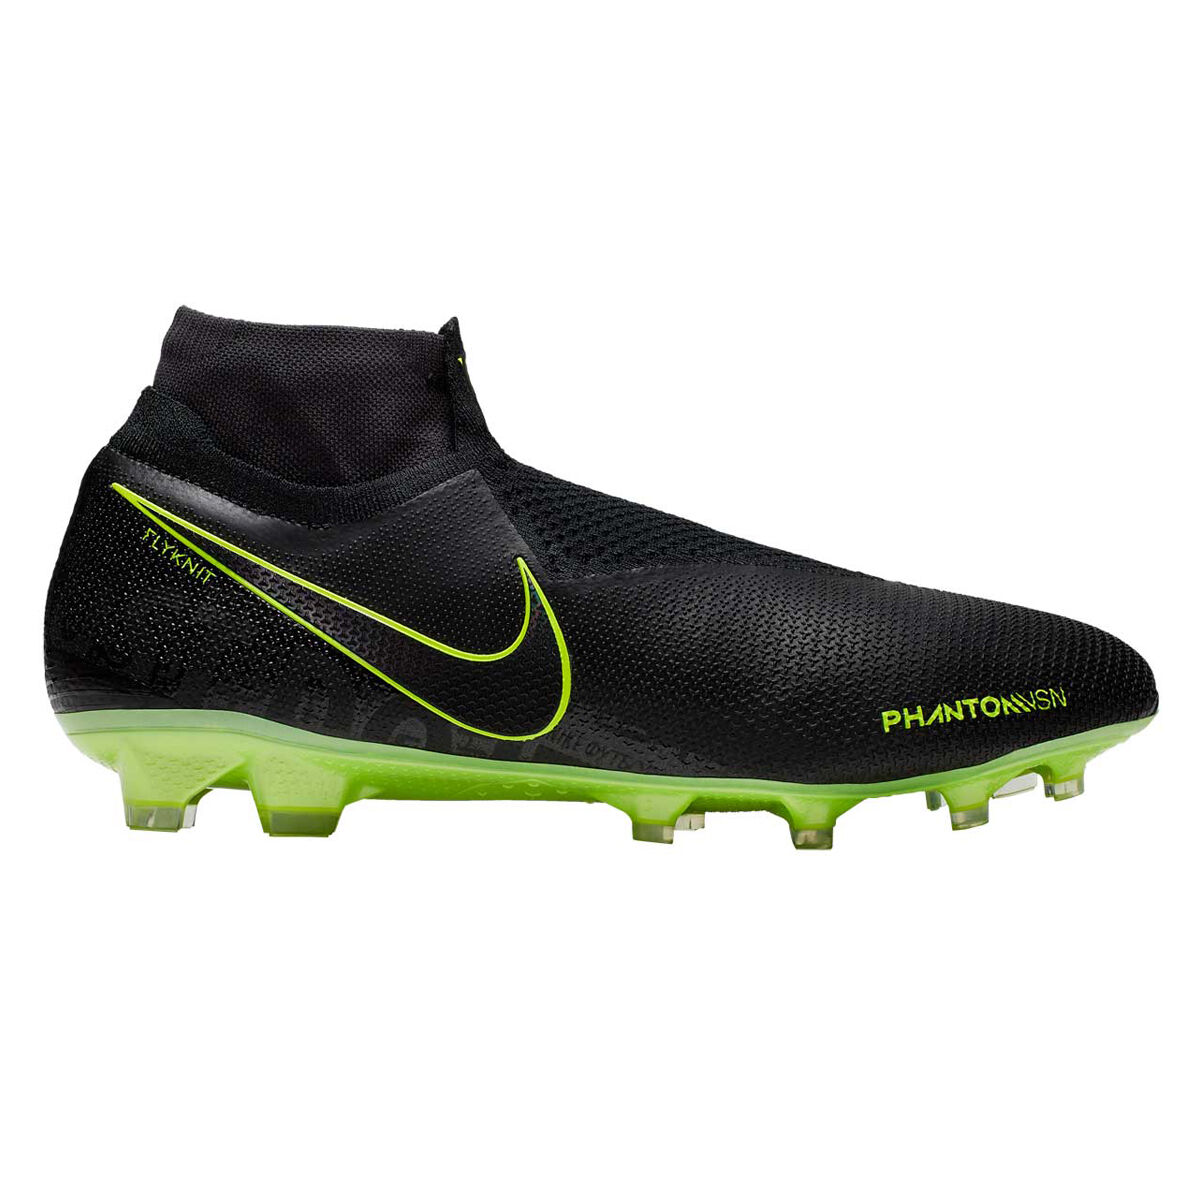 ghost lace football boots